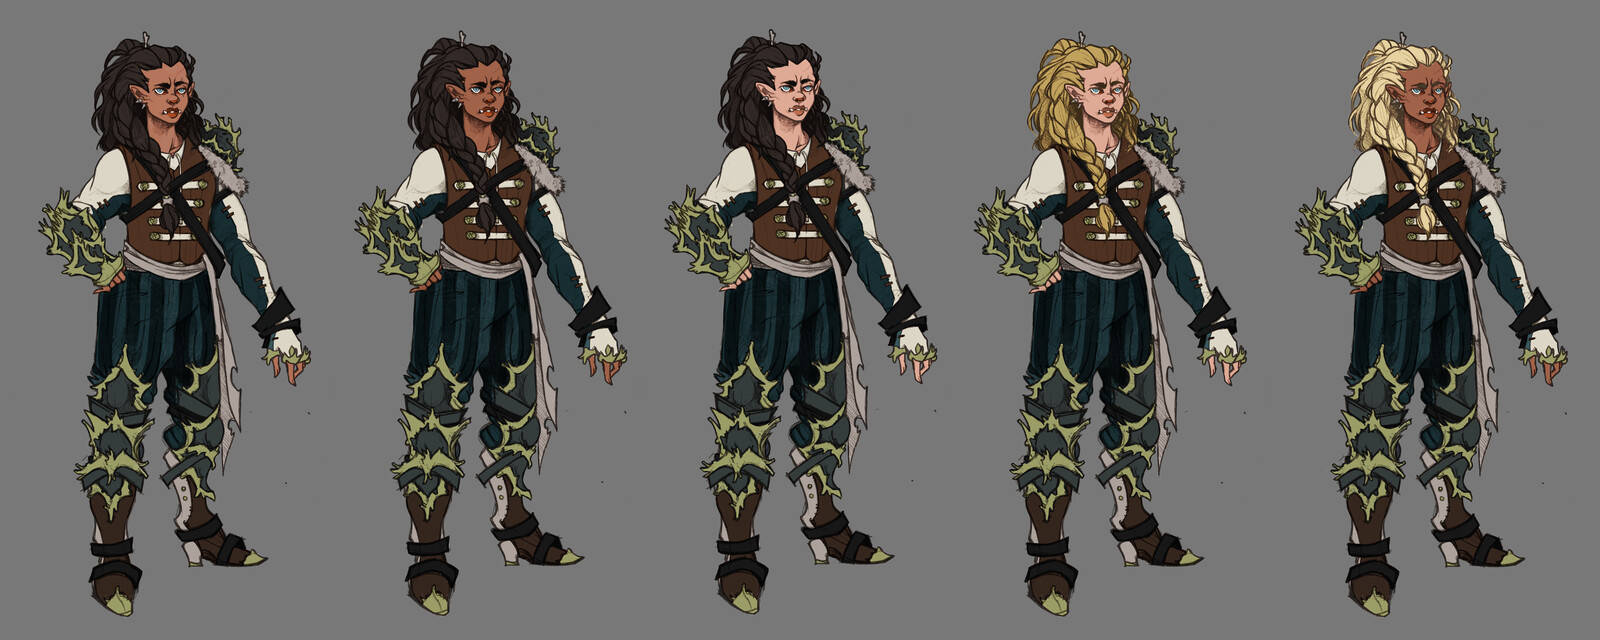 Skin tone tests, referencing Jaina, Mag'har orcs, and Thrall's other children. Final is on the far left.